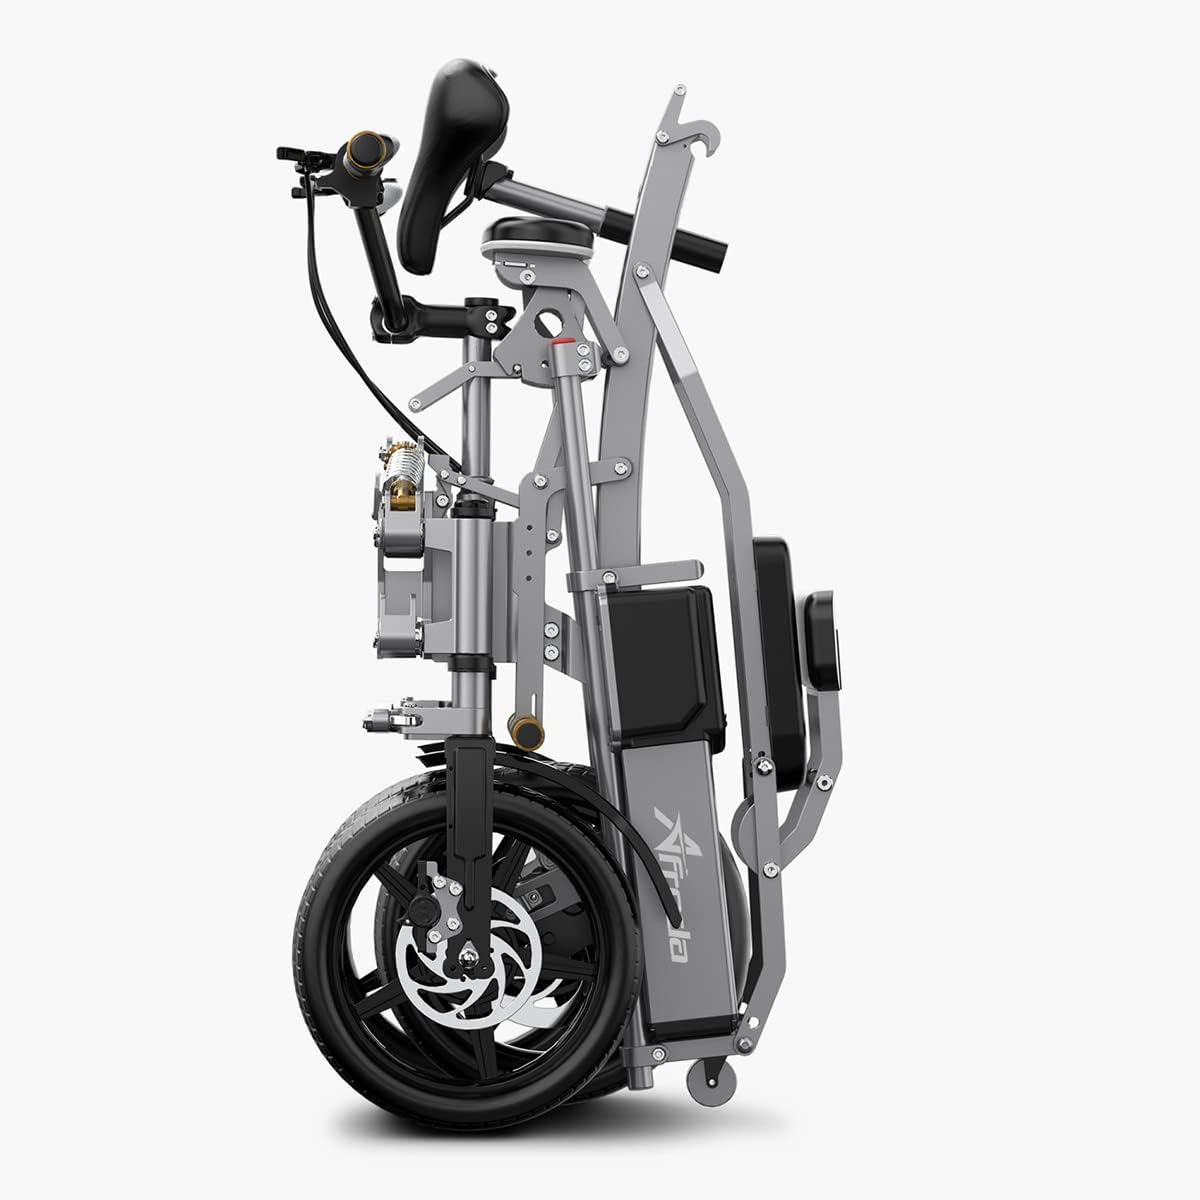 ESWING M18 All-Terrain Stability Suspension Electric Tricycle US/CA